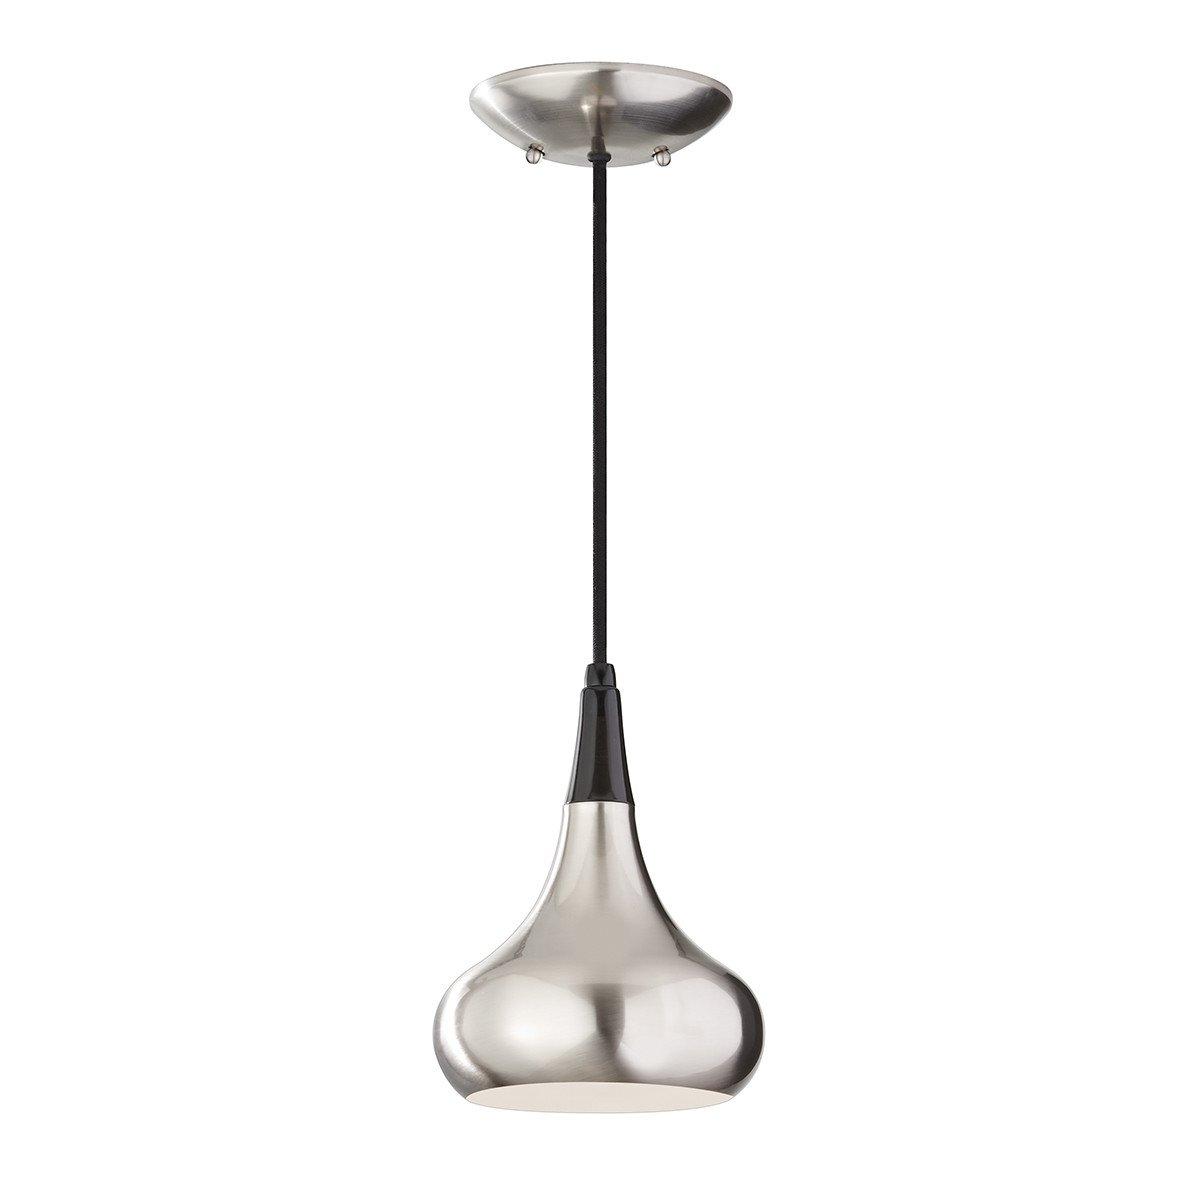 Beso 1 Light Dome Ceiling Pendant Brushed Steel E27